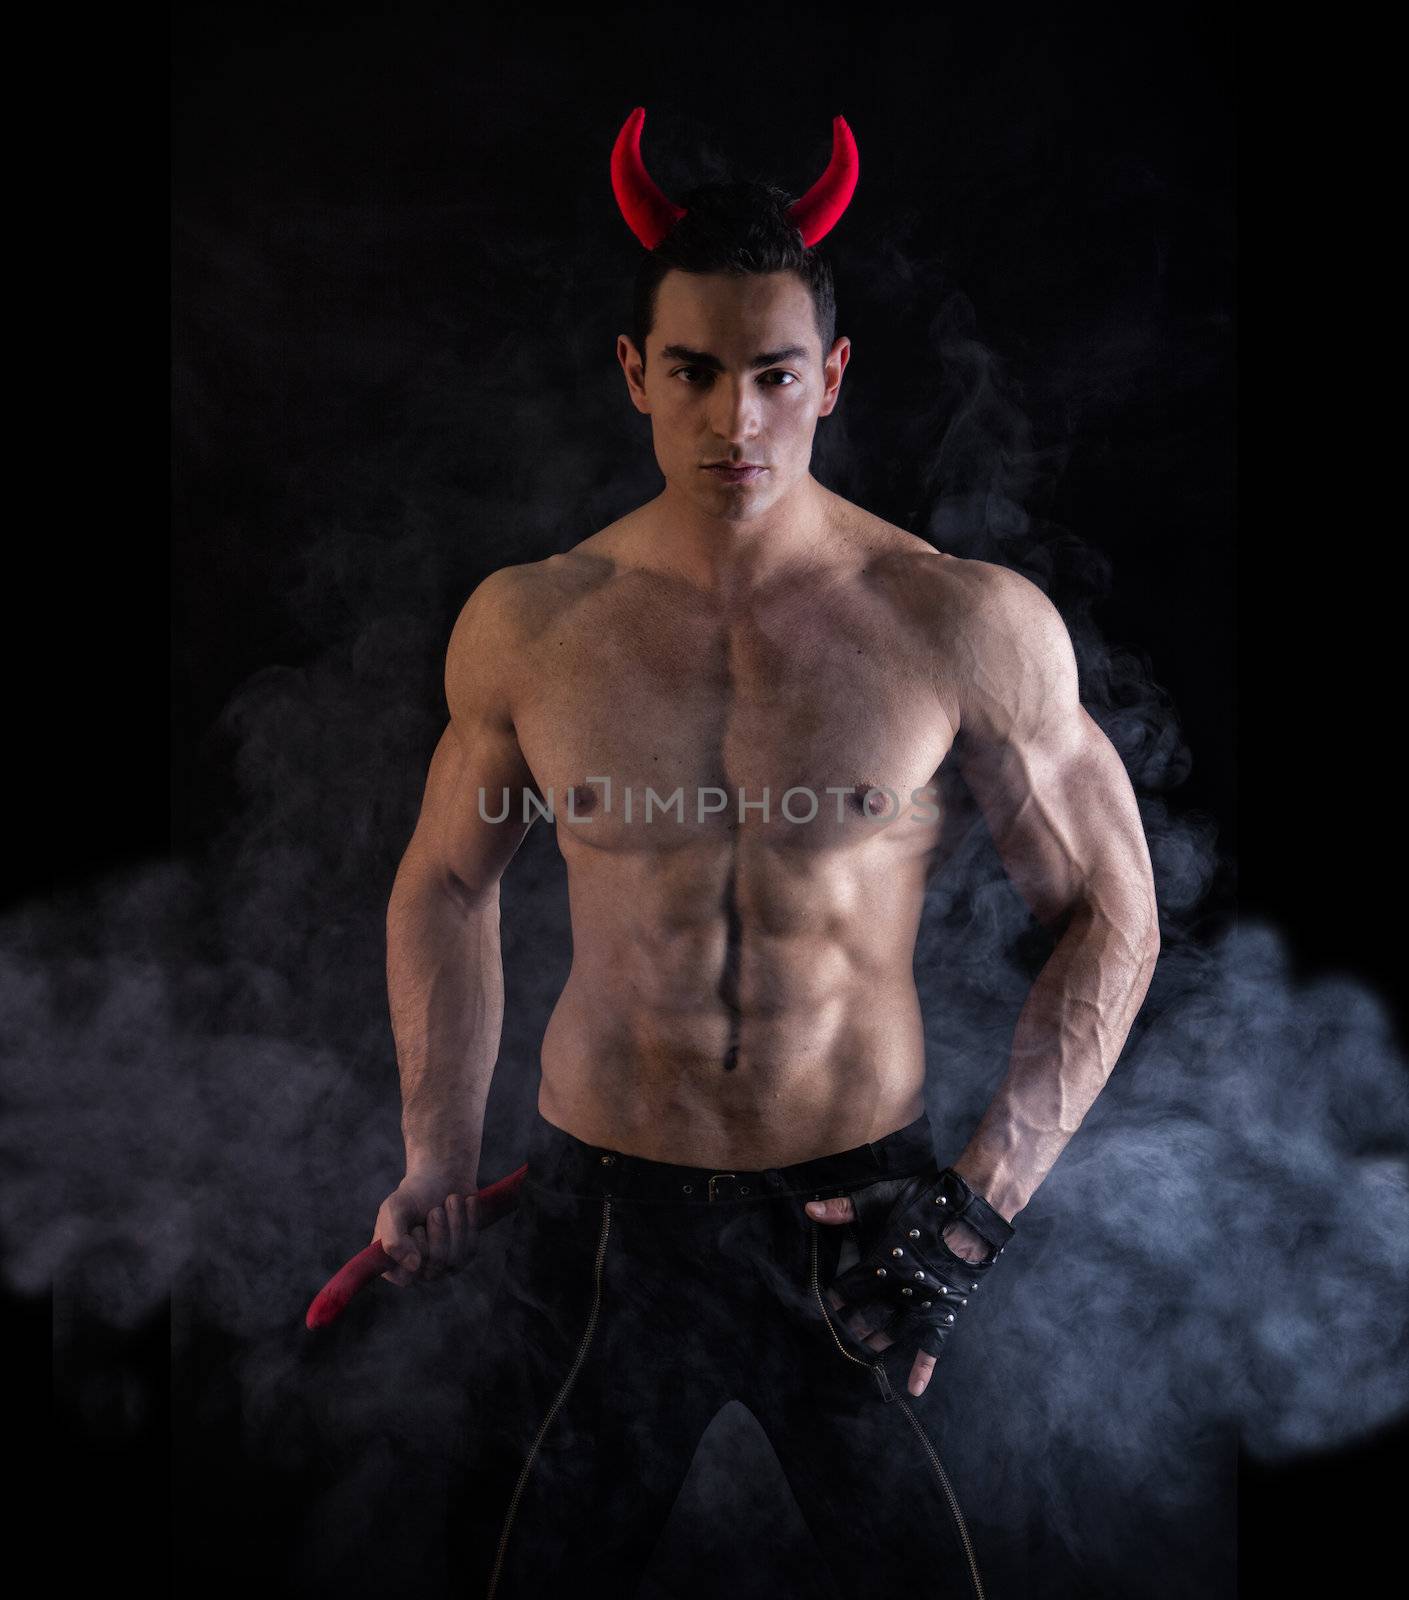 Sexy Handsome Man Wearing Devilish Horn Accessories Showing Muscled Body. Isolated on Smoky Background.